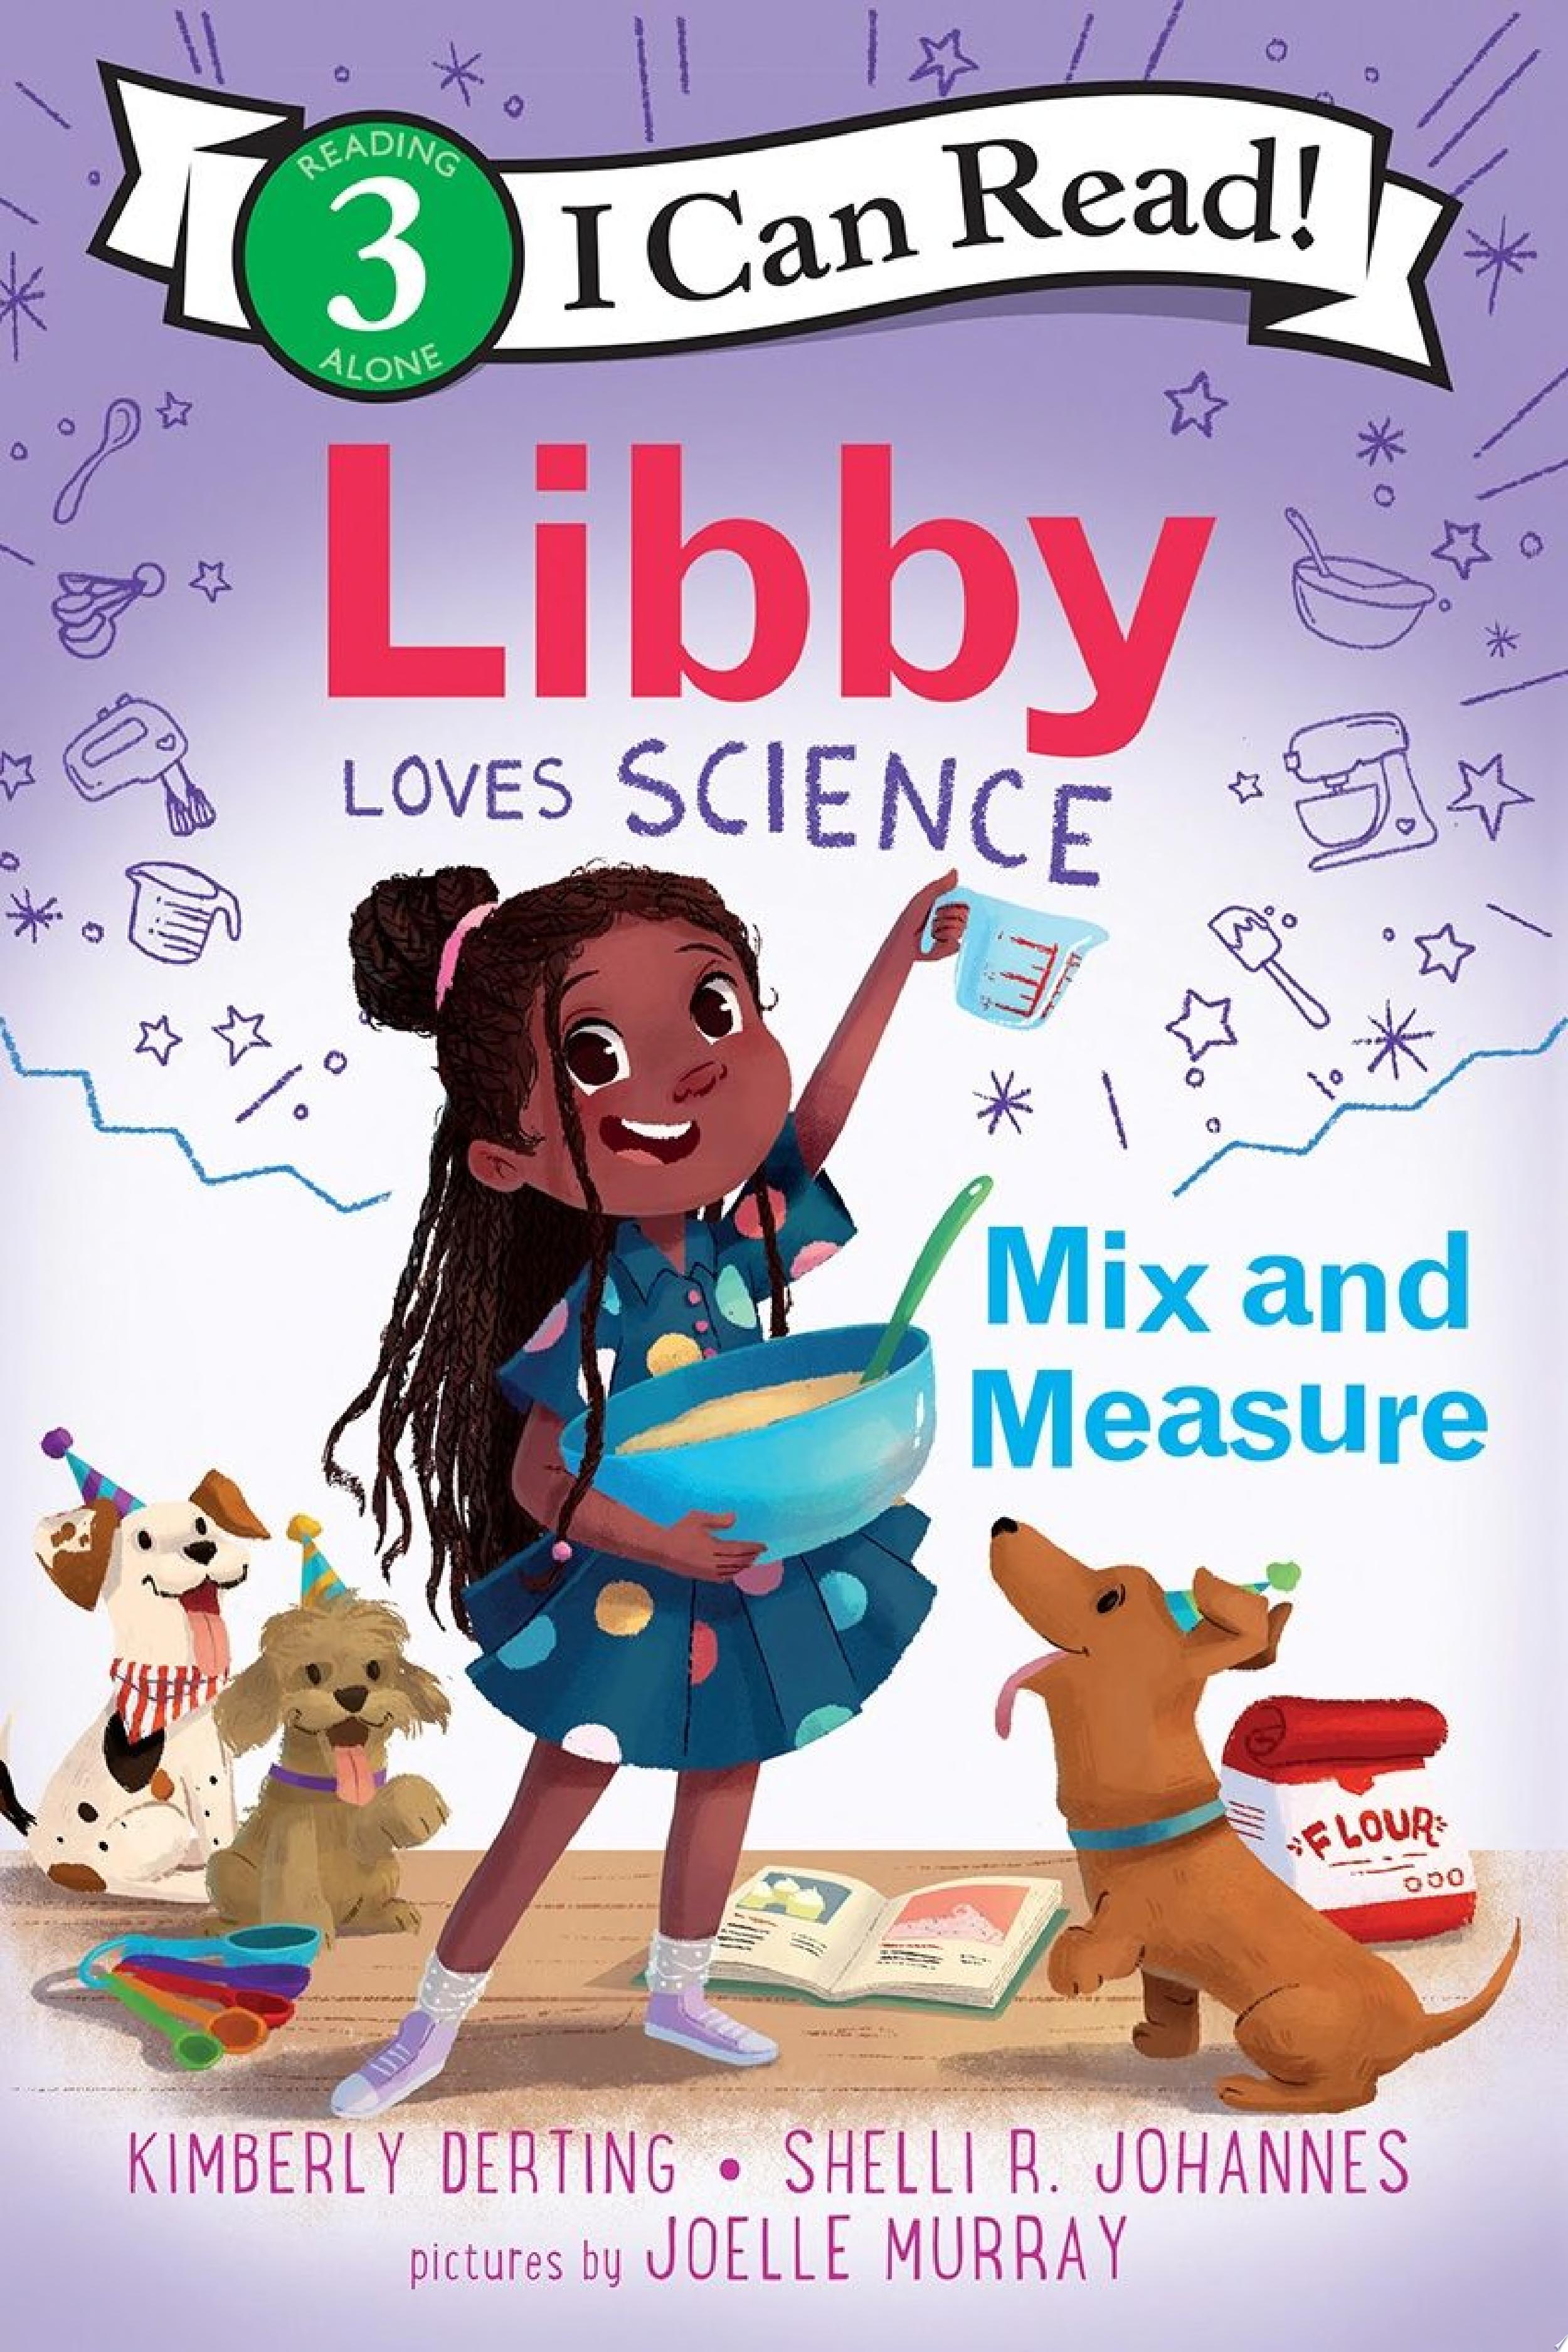 Image for "Libby Loves Science: Mix and Measure"